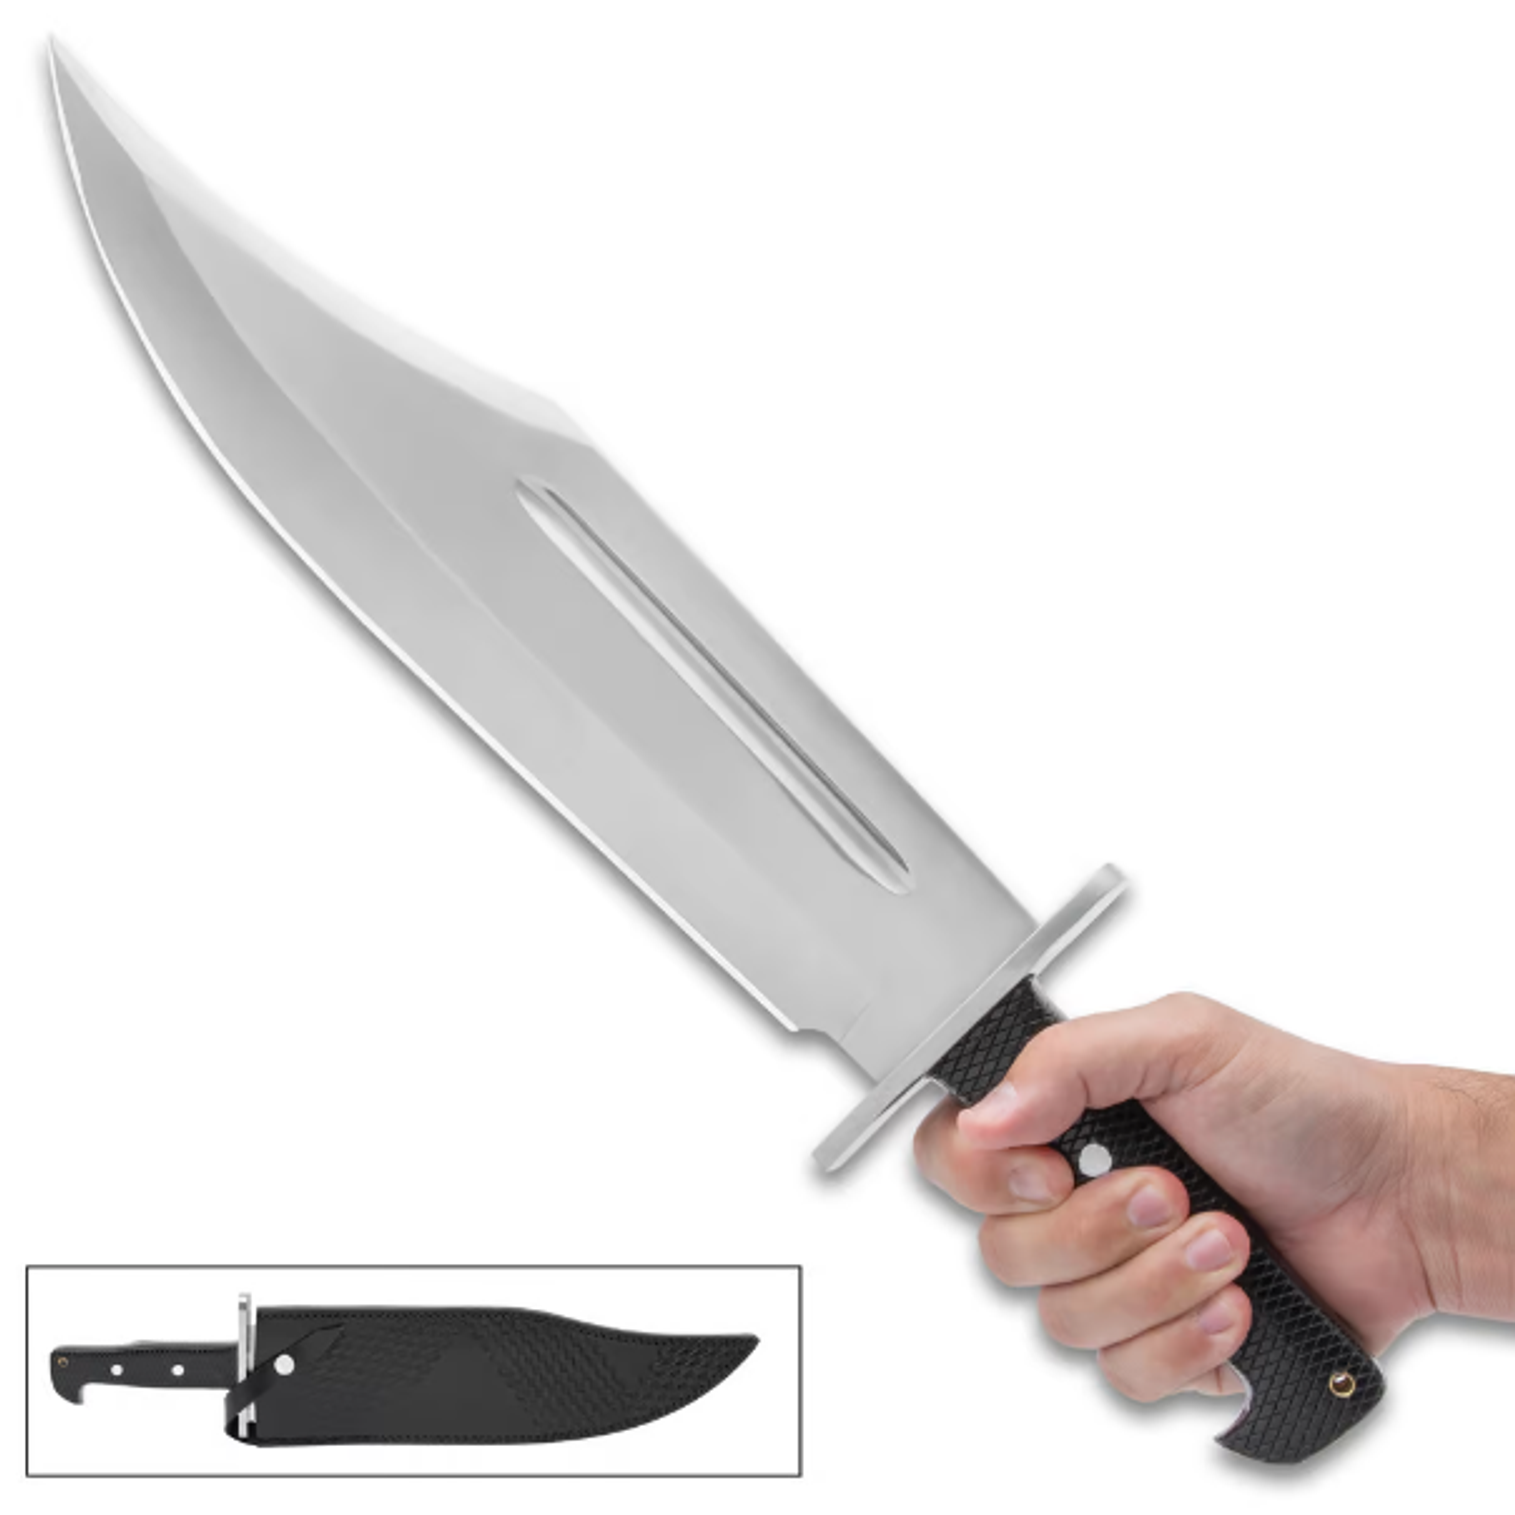 Behemoth Bowie Knife And Sheath - Stainless Steel